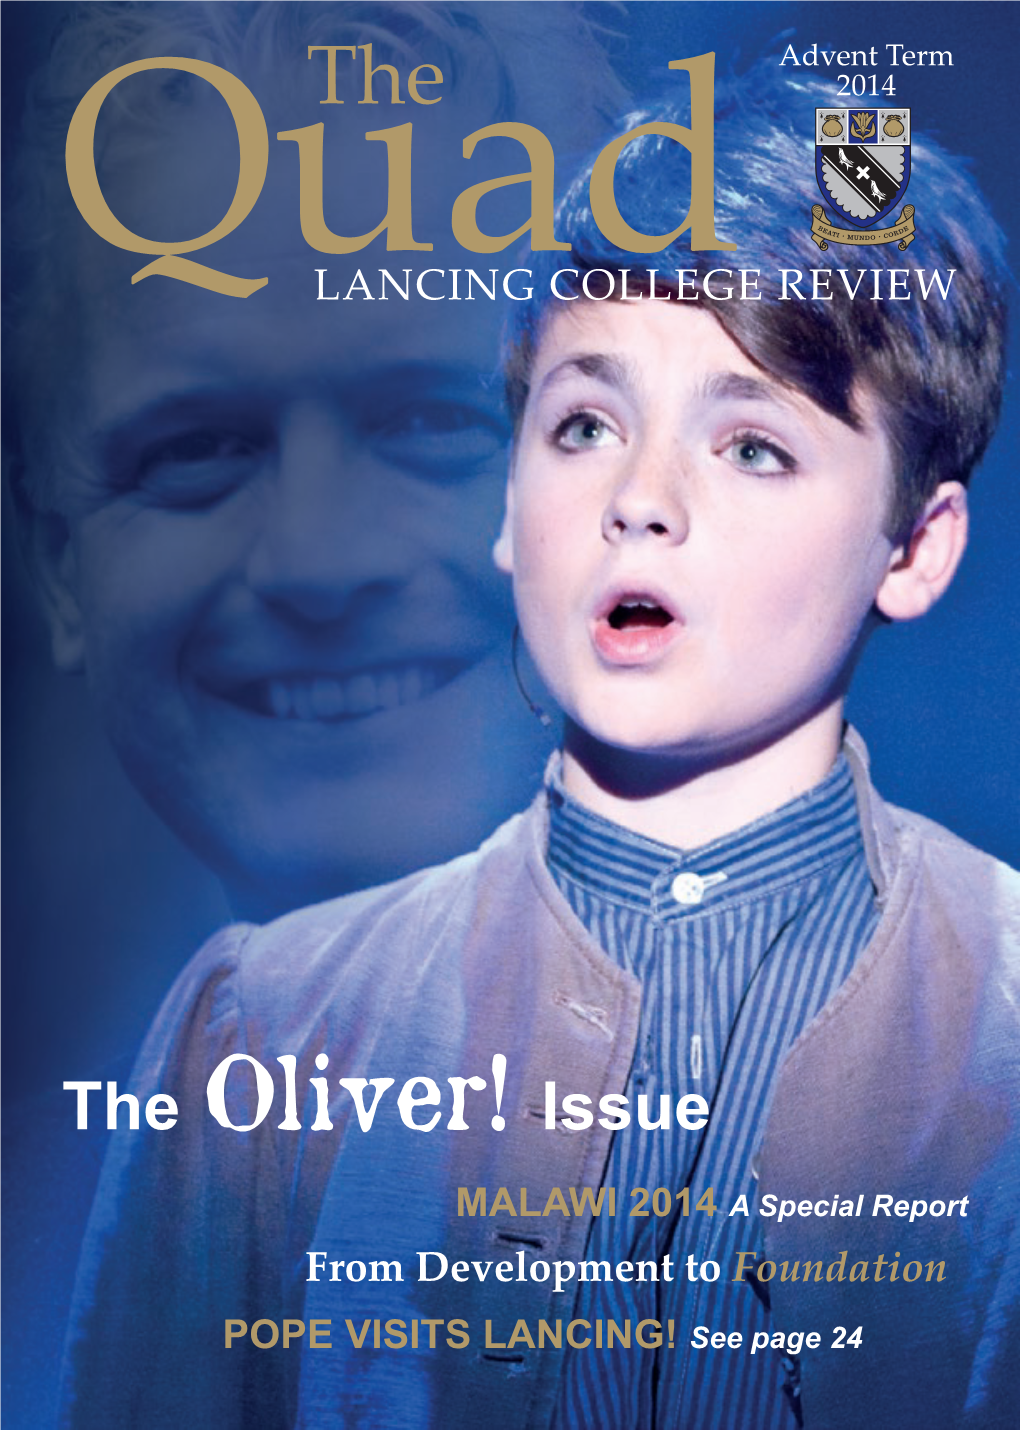 The Oliver! Issue